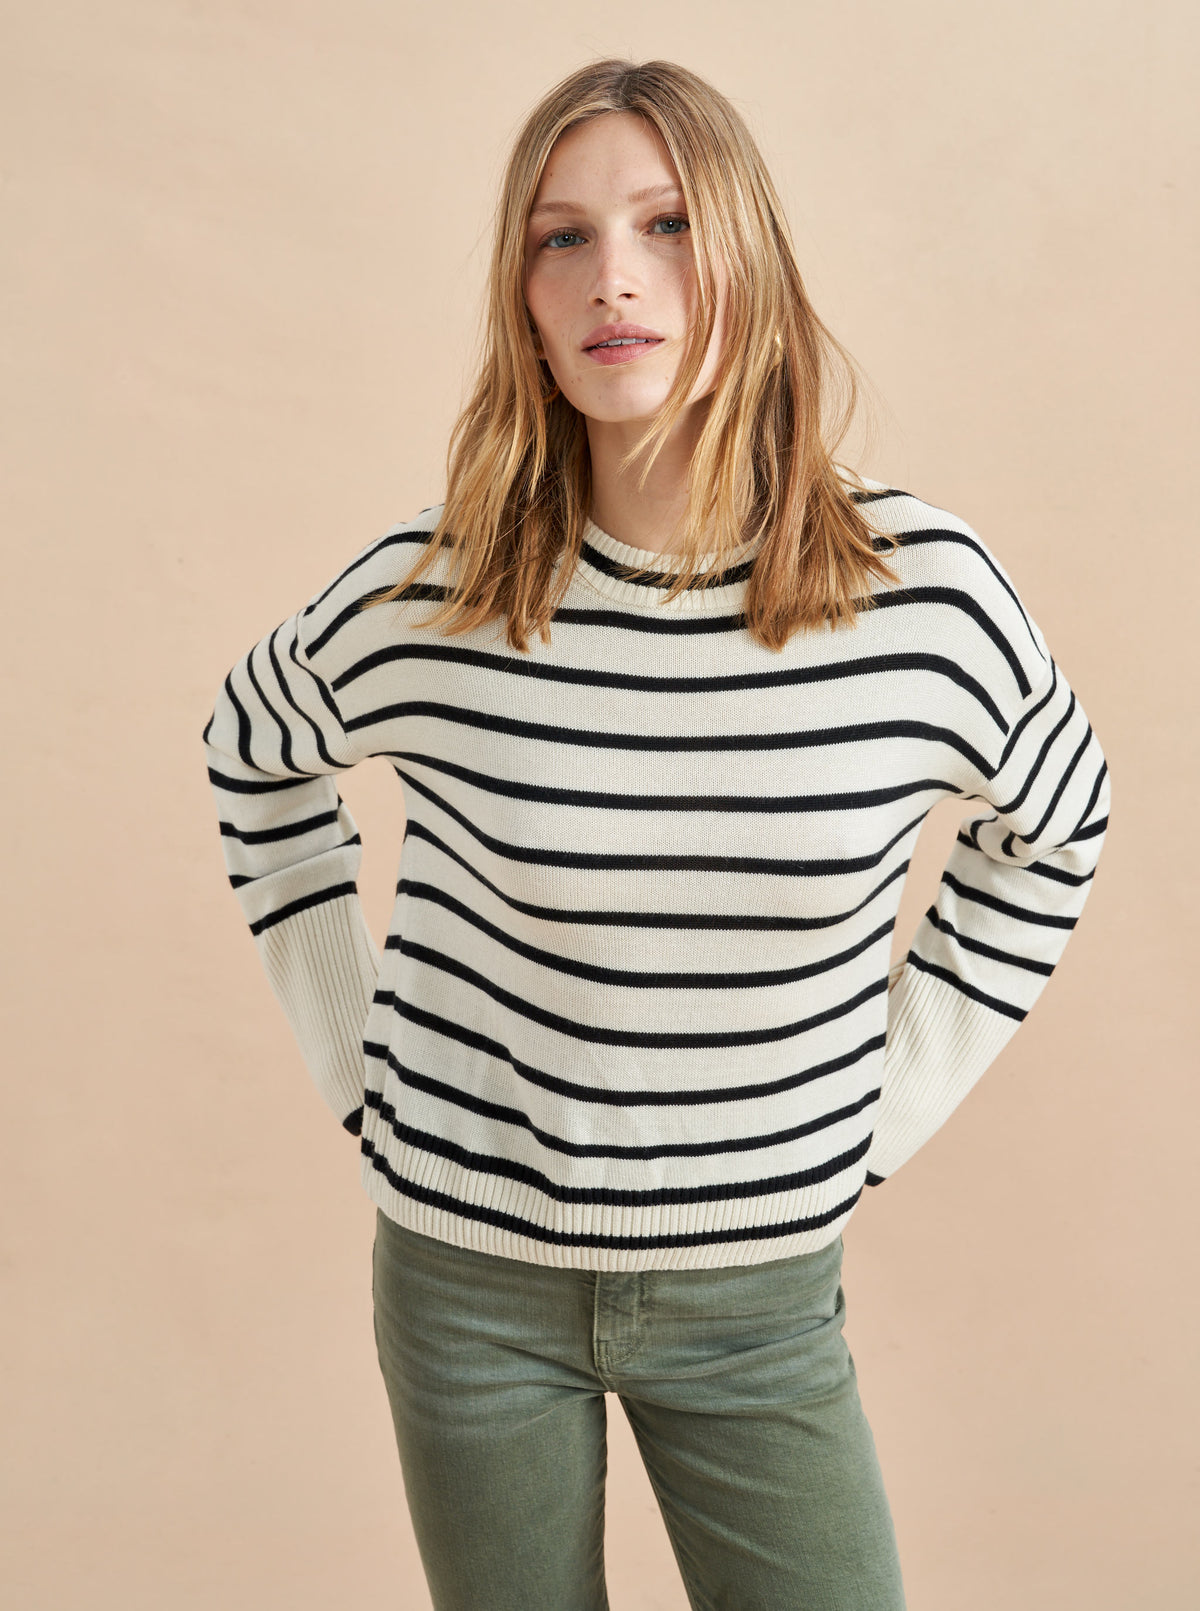 Can you ever have enough striped sweaters? We think not. Take our new striped, favorite classic in a lightweight, supremely soft silk/cashmere blend. Do you need it? We think yes.